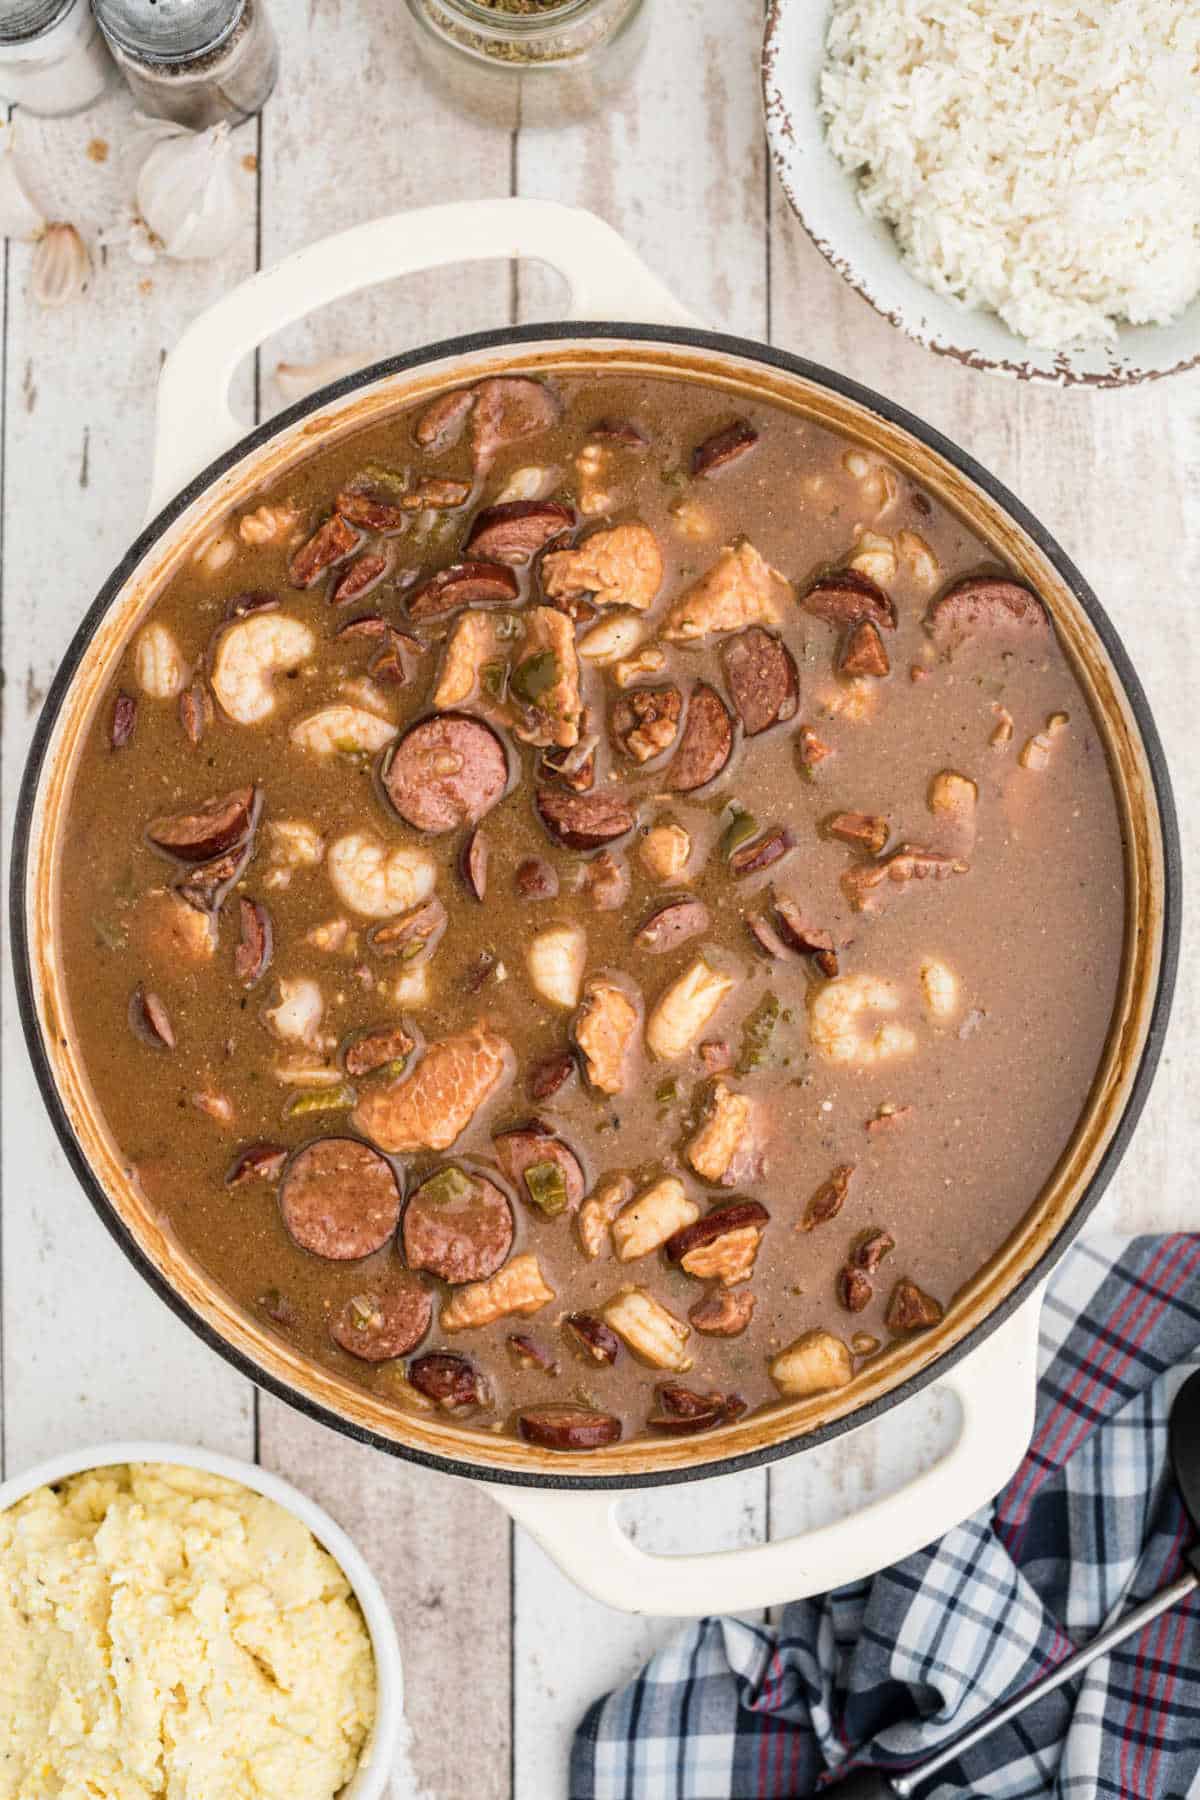 a pot full of alligator gumbo with sausage and shrimp